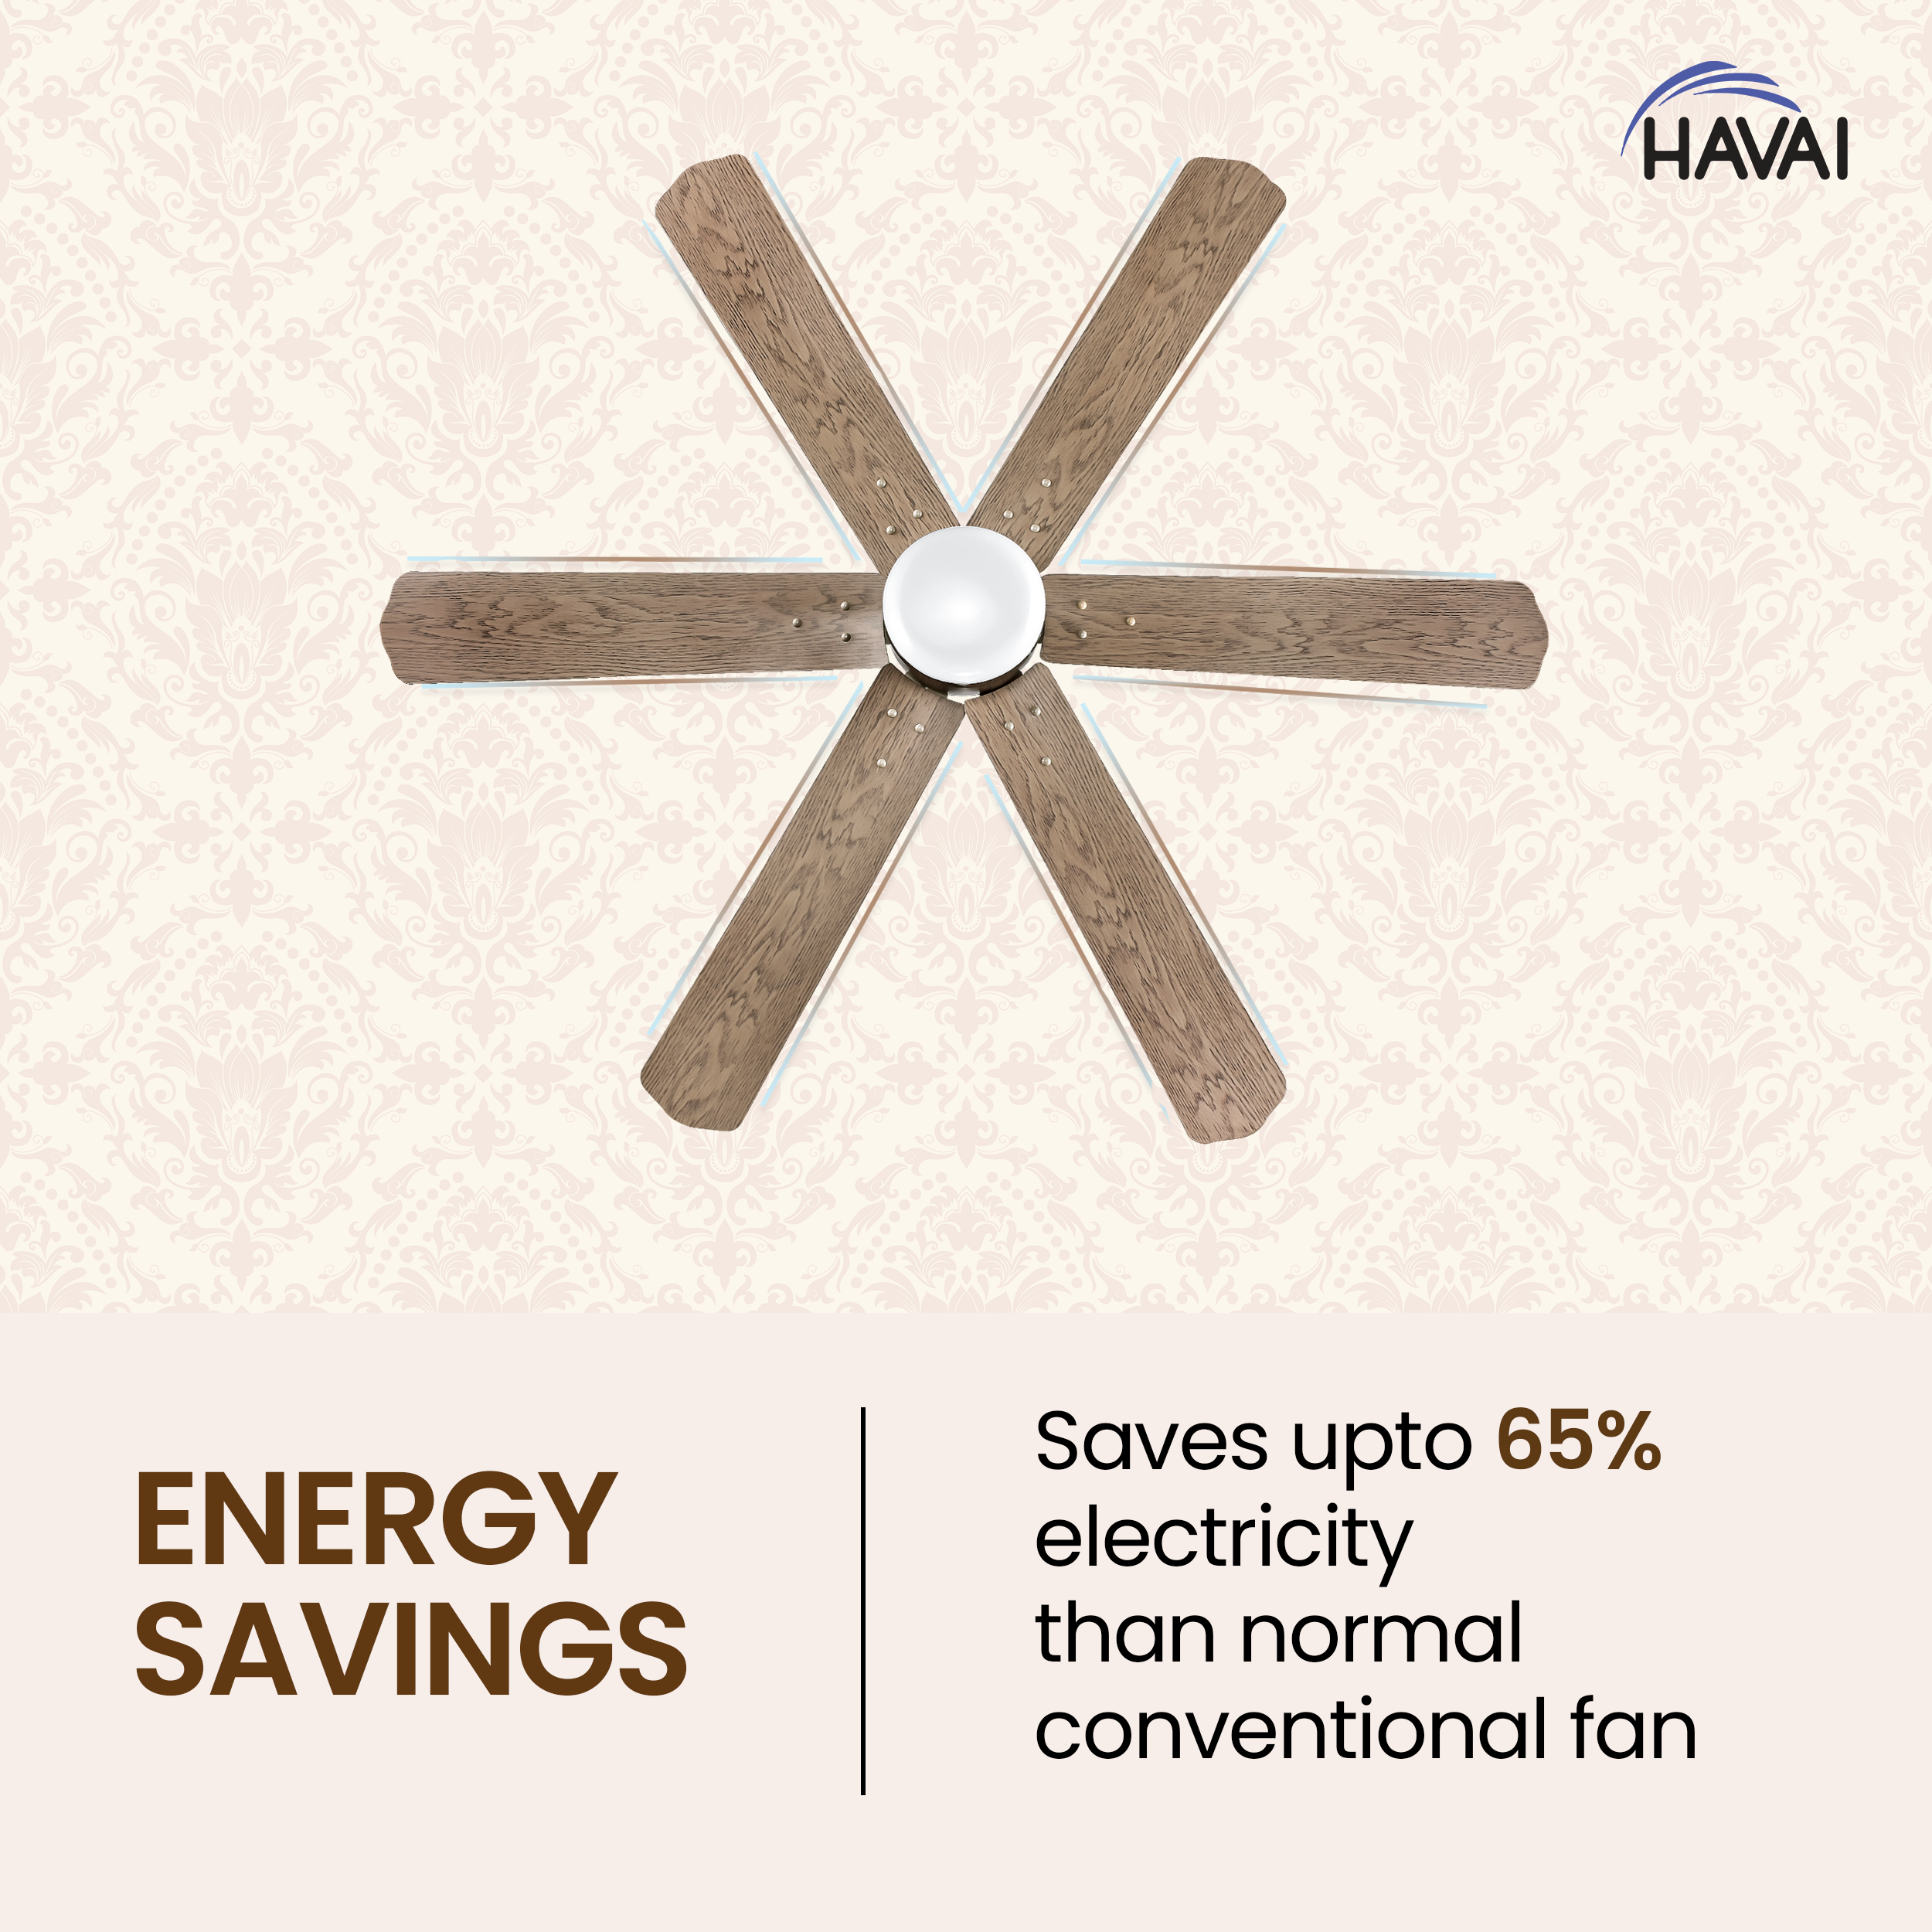 HAVAI Pristine Wooden Range BLDC Ceiling Fan - 6 Blades - 35W, Ashwood 1200mm Blade with Remote (WHITE 9W LED)…